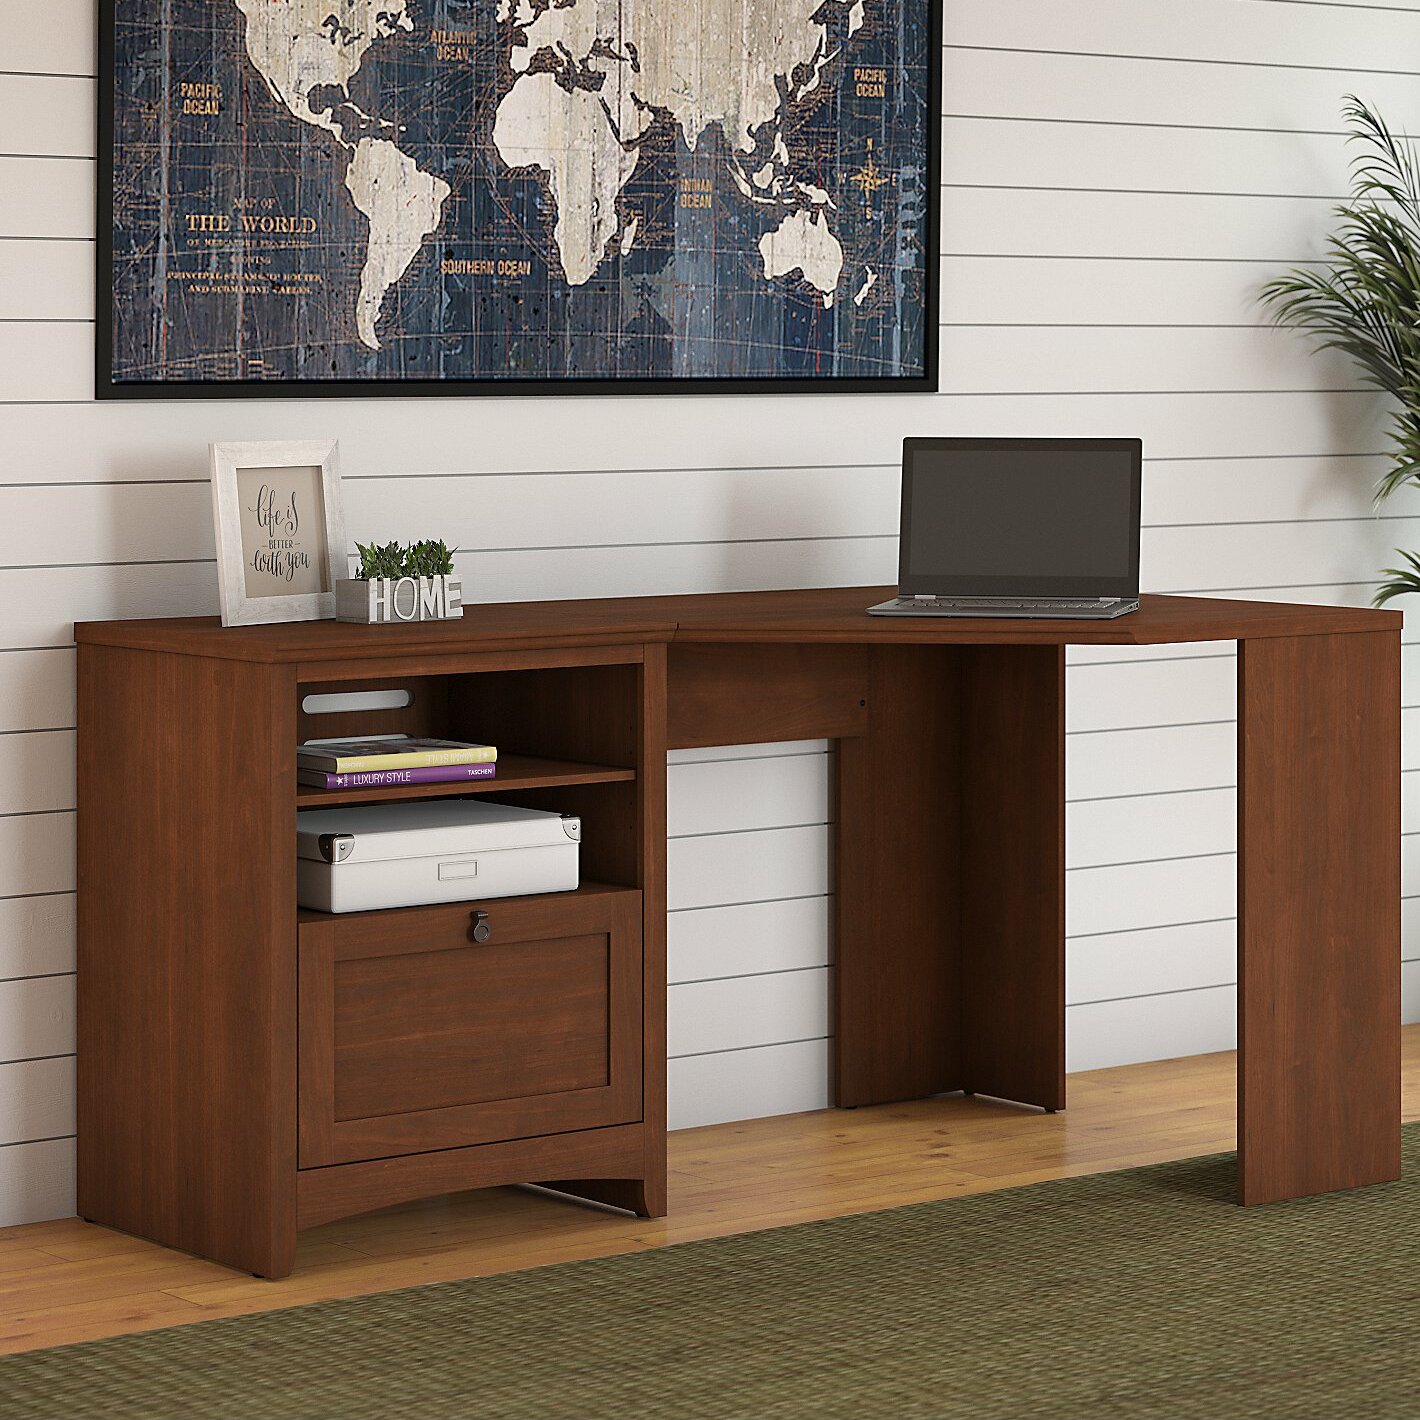 Darby Home Co Fralick Corner Desk With Hutch Reviews Wayfair